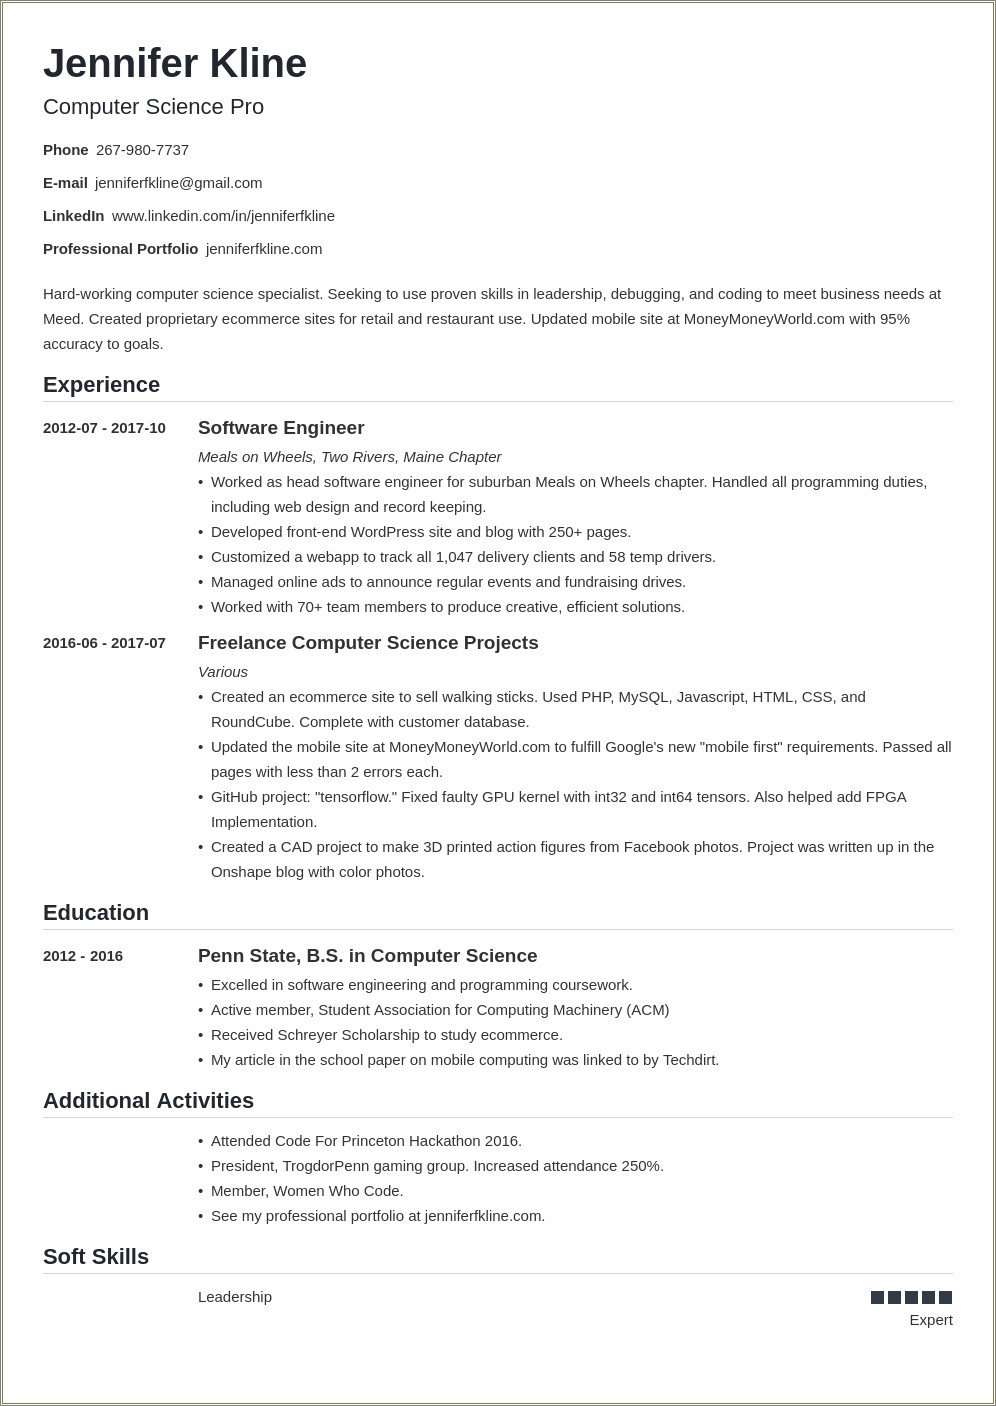 Volunteer And Skills Section Of Resume